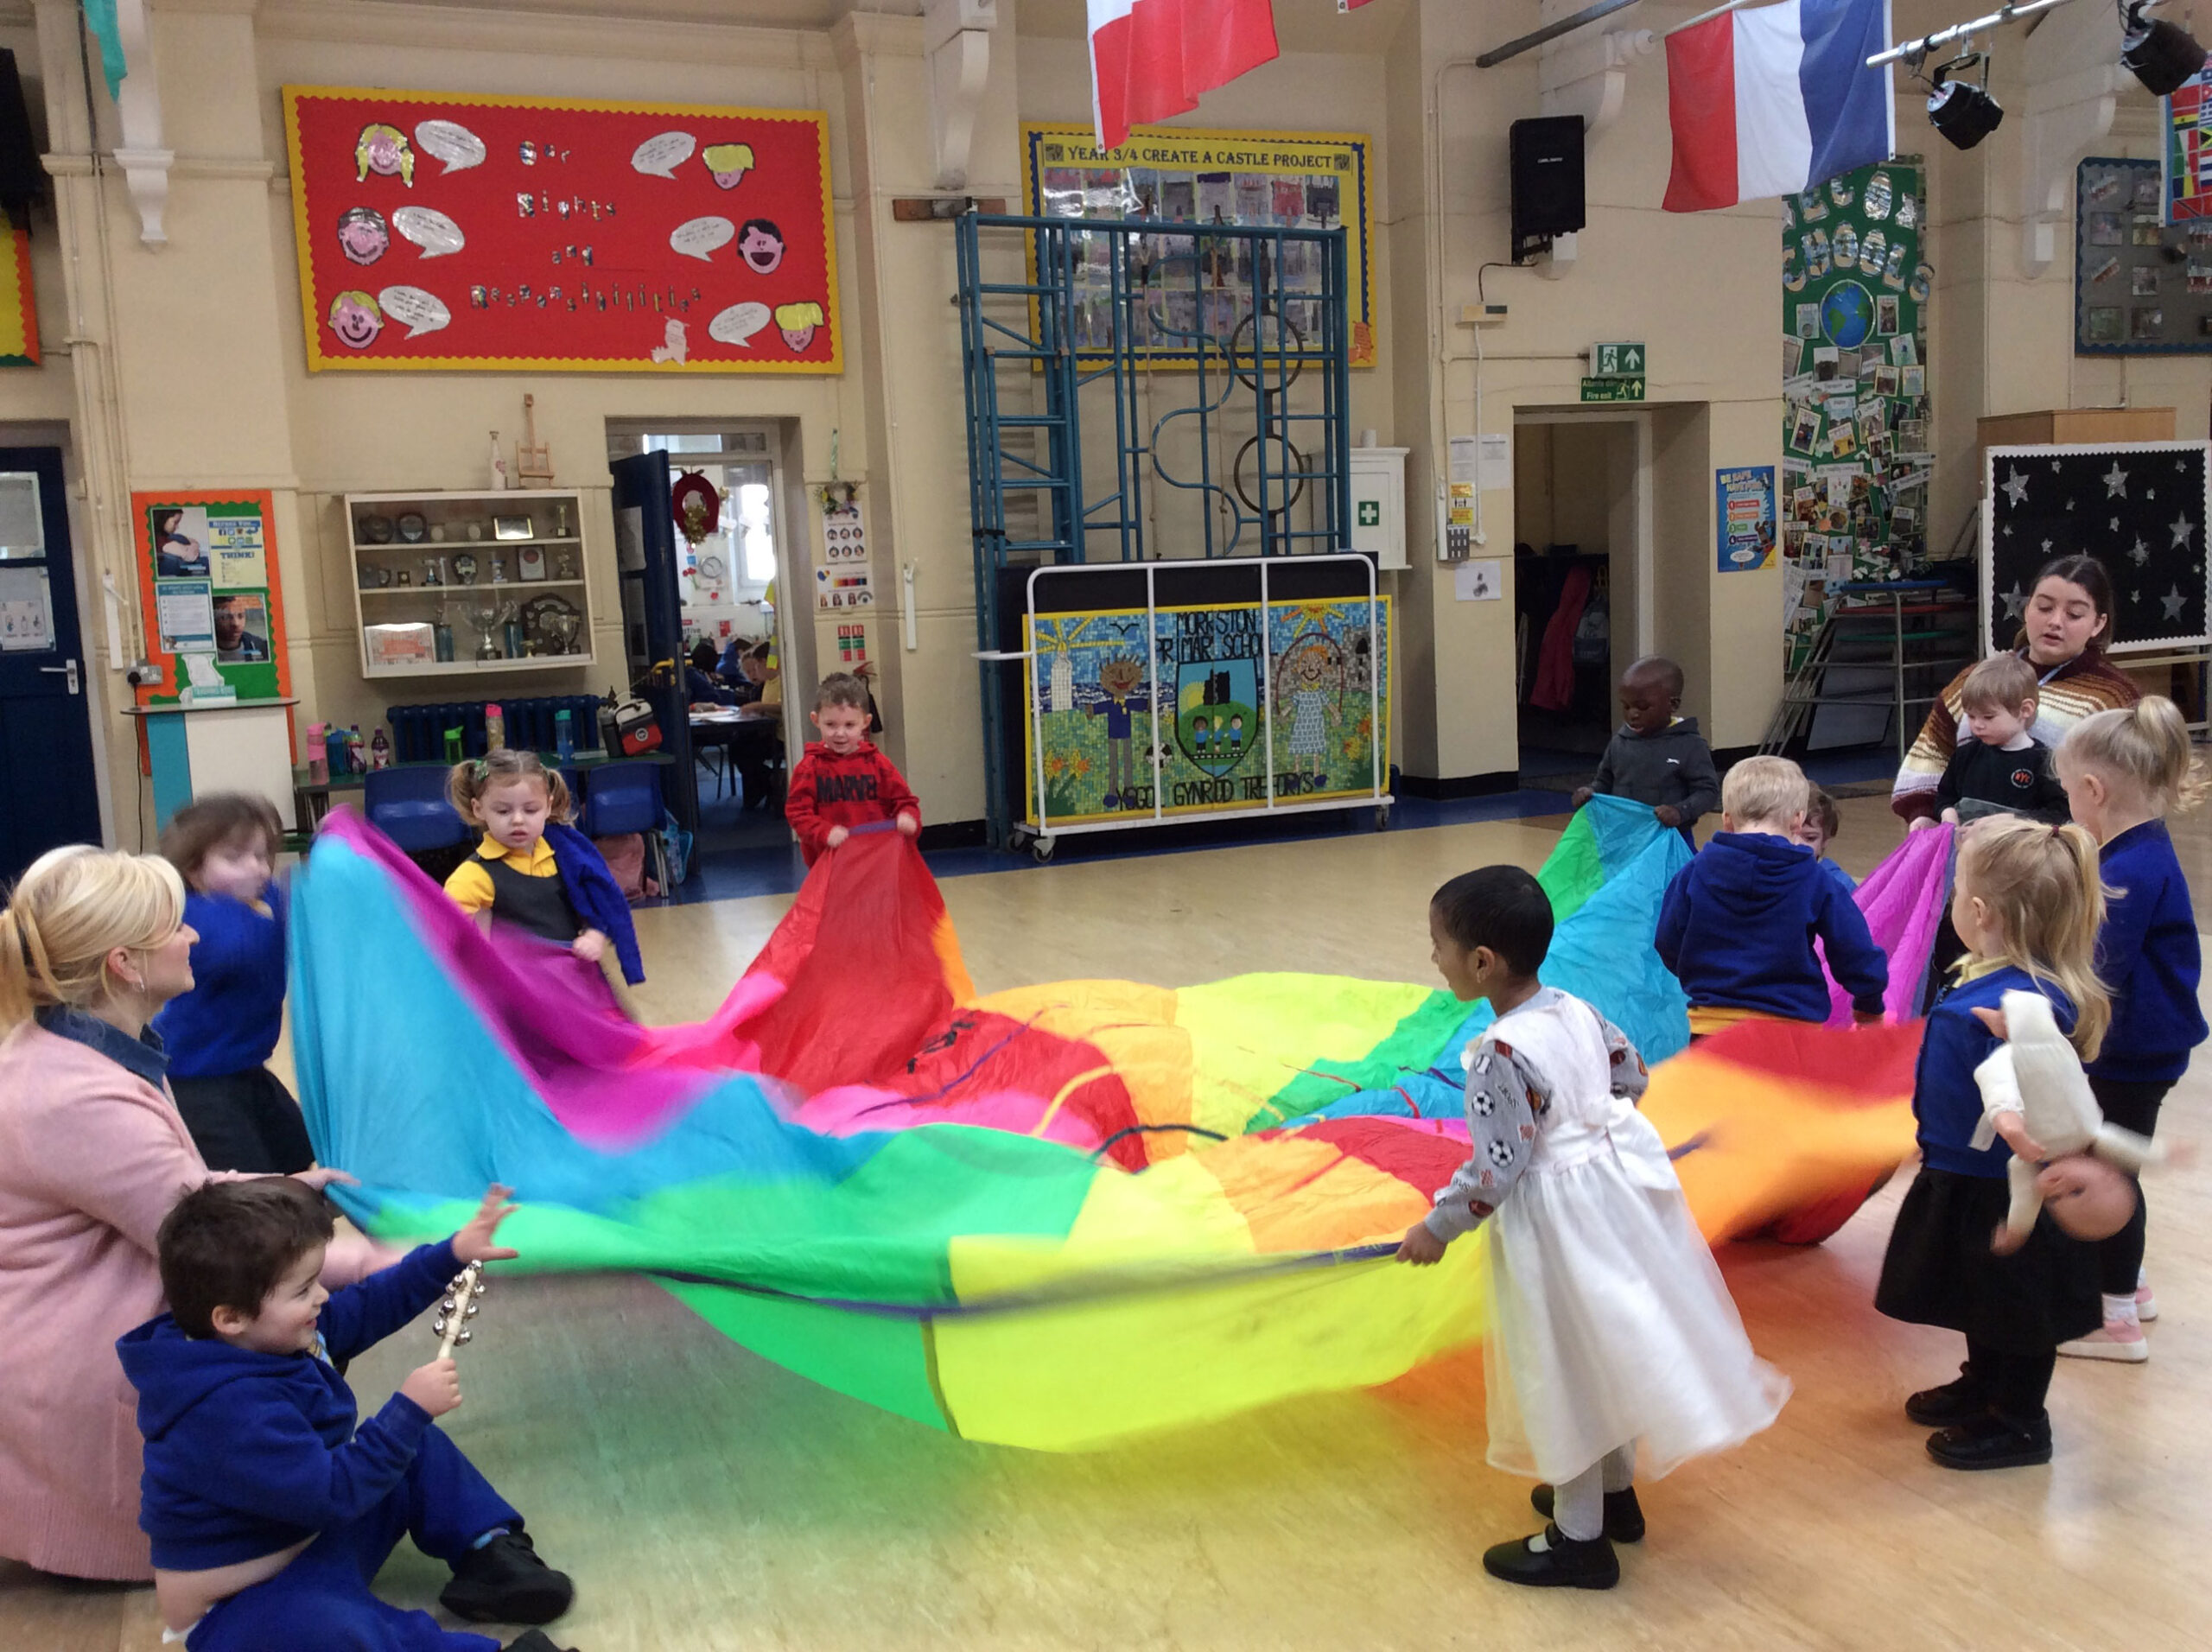 New play equipment and instruments for Morriston Primary School